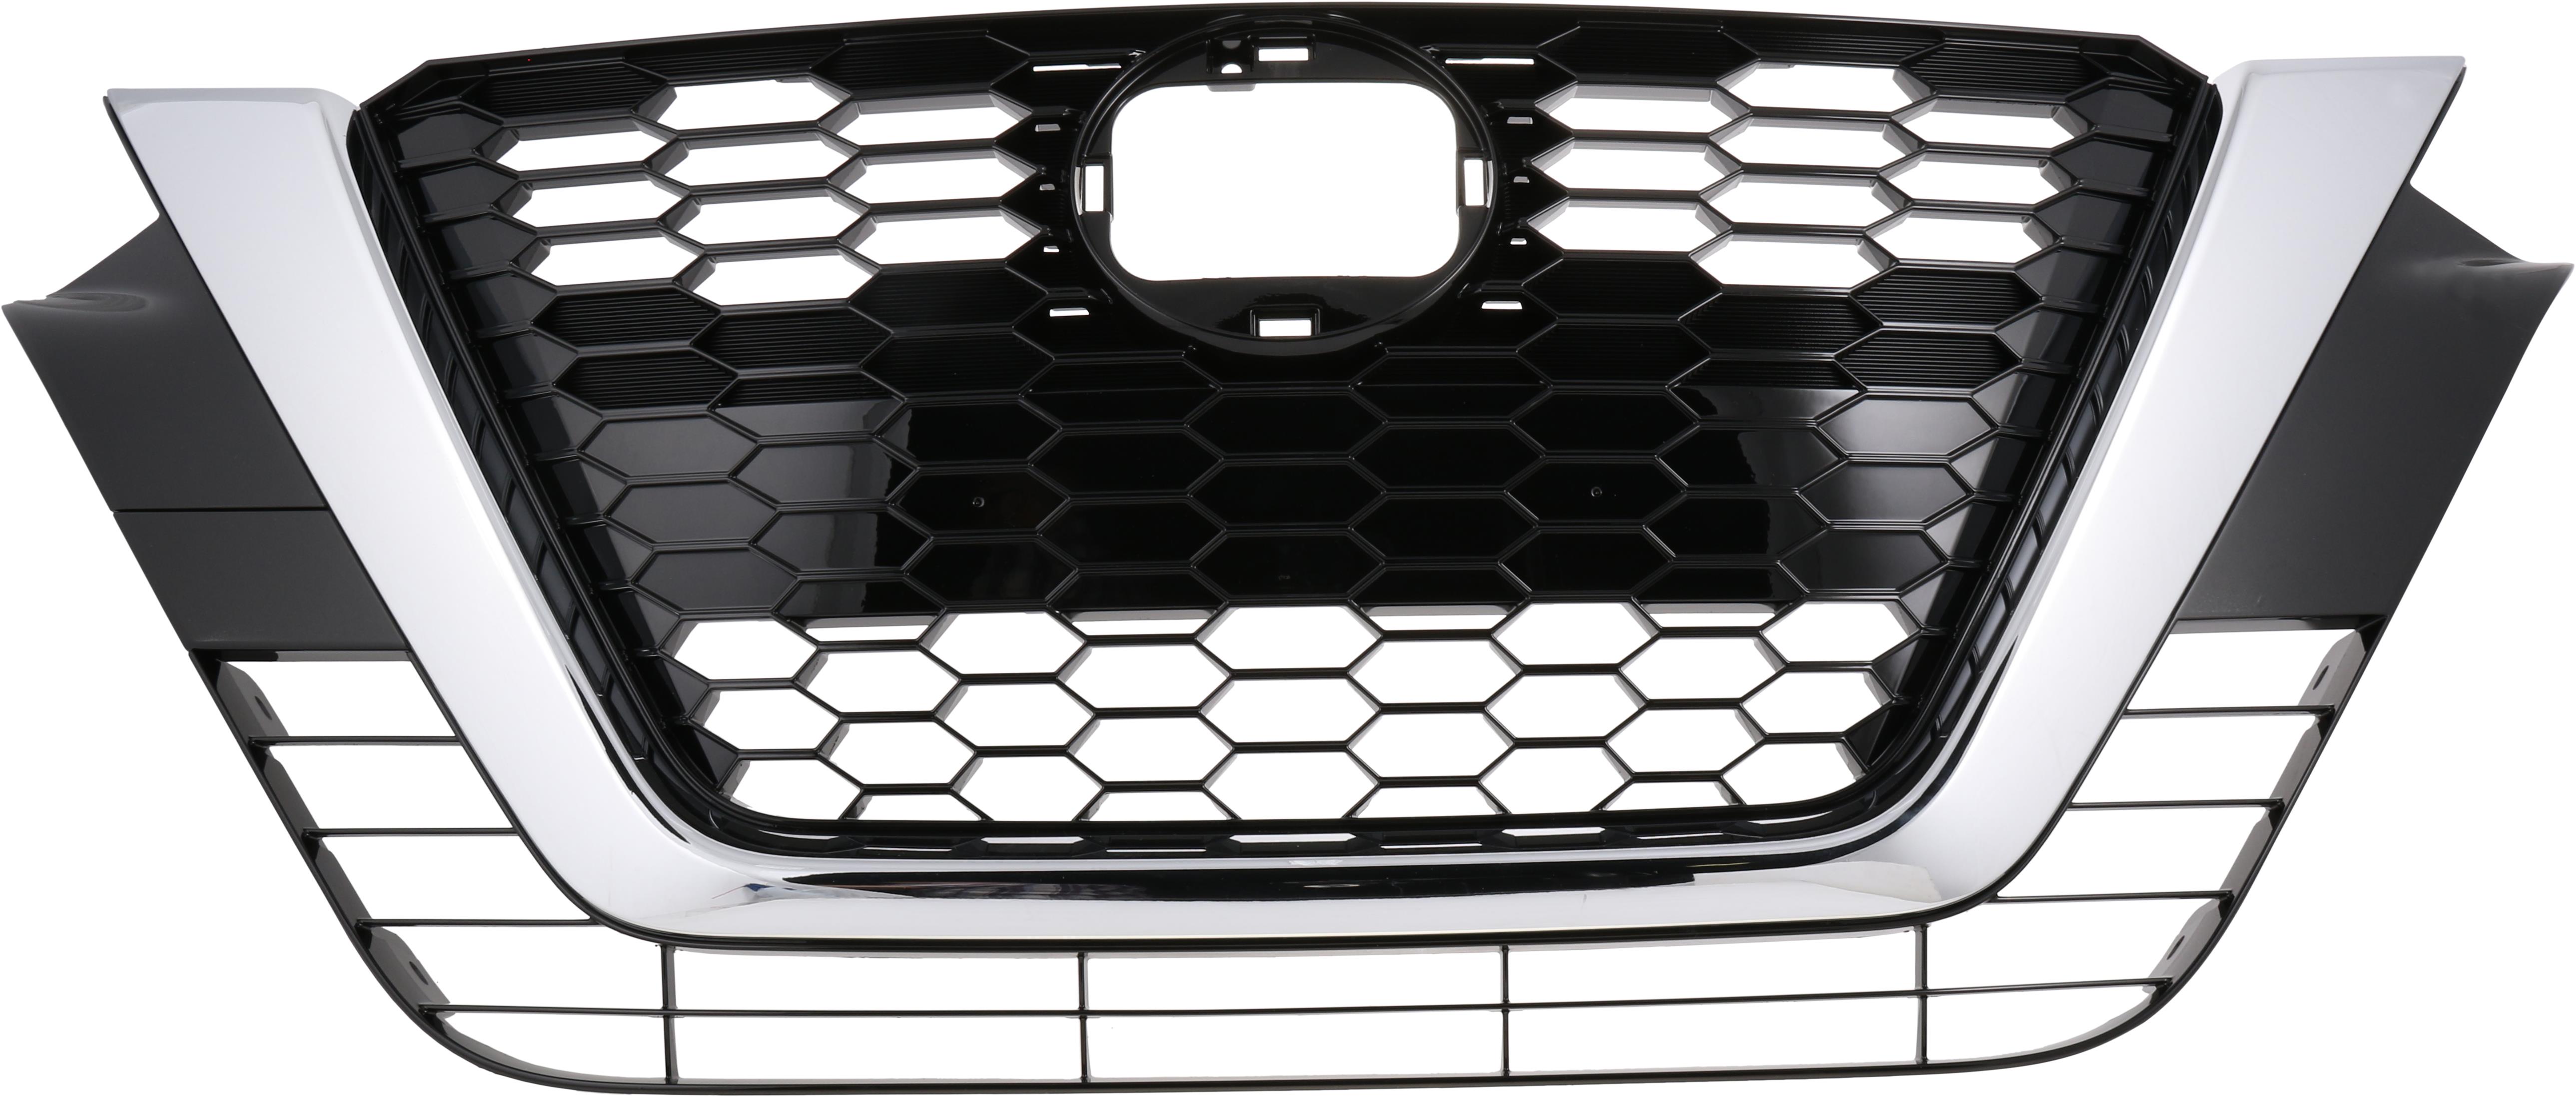 Replacing front grill on Nissan Altima 